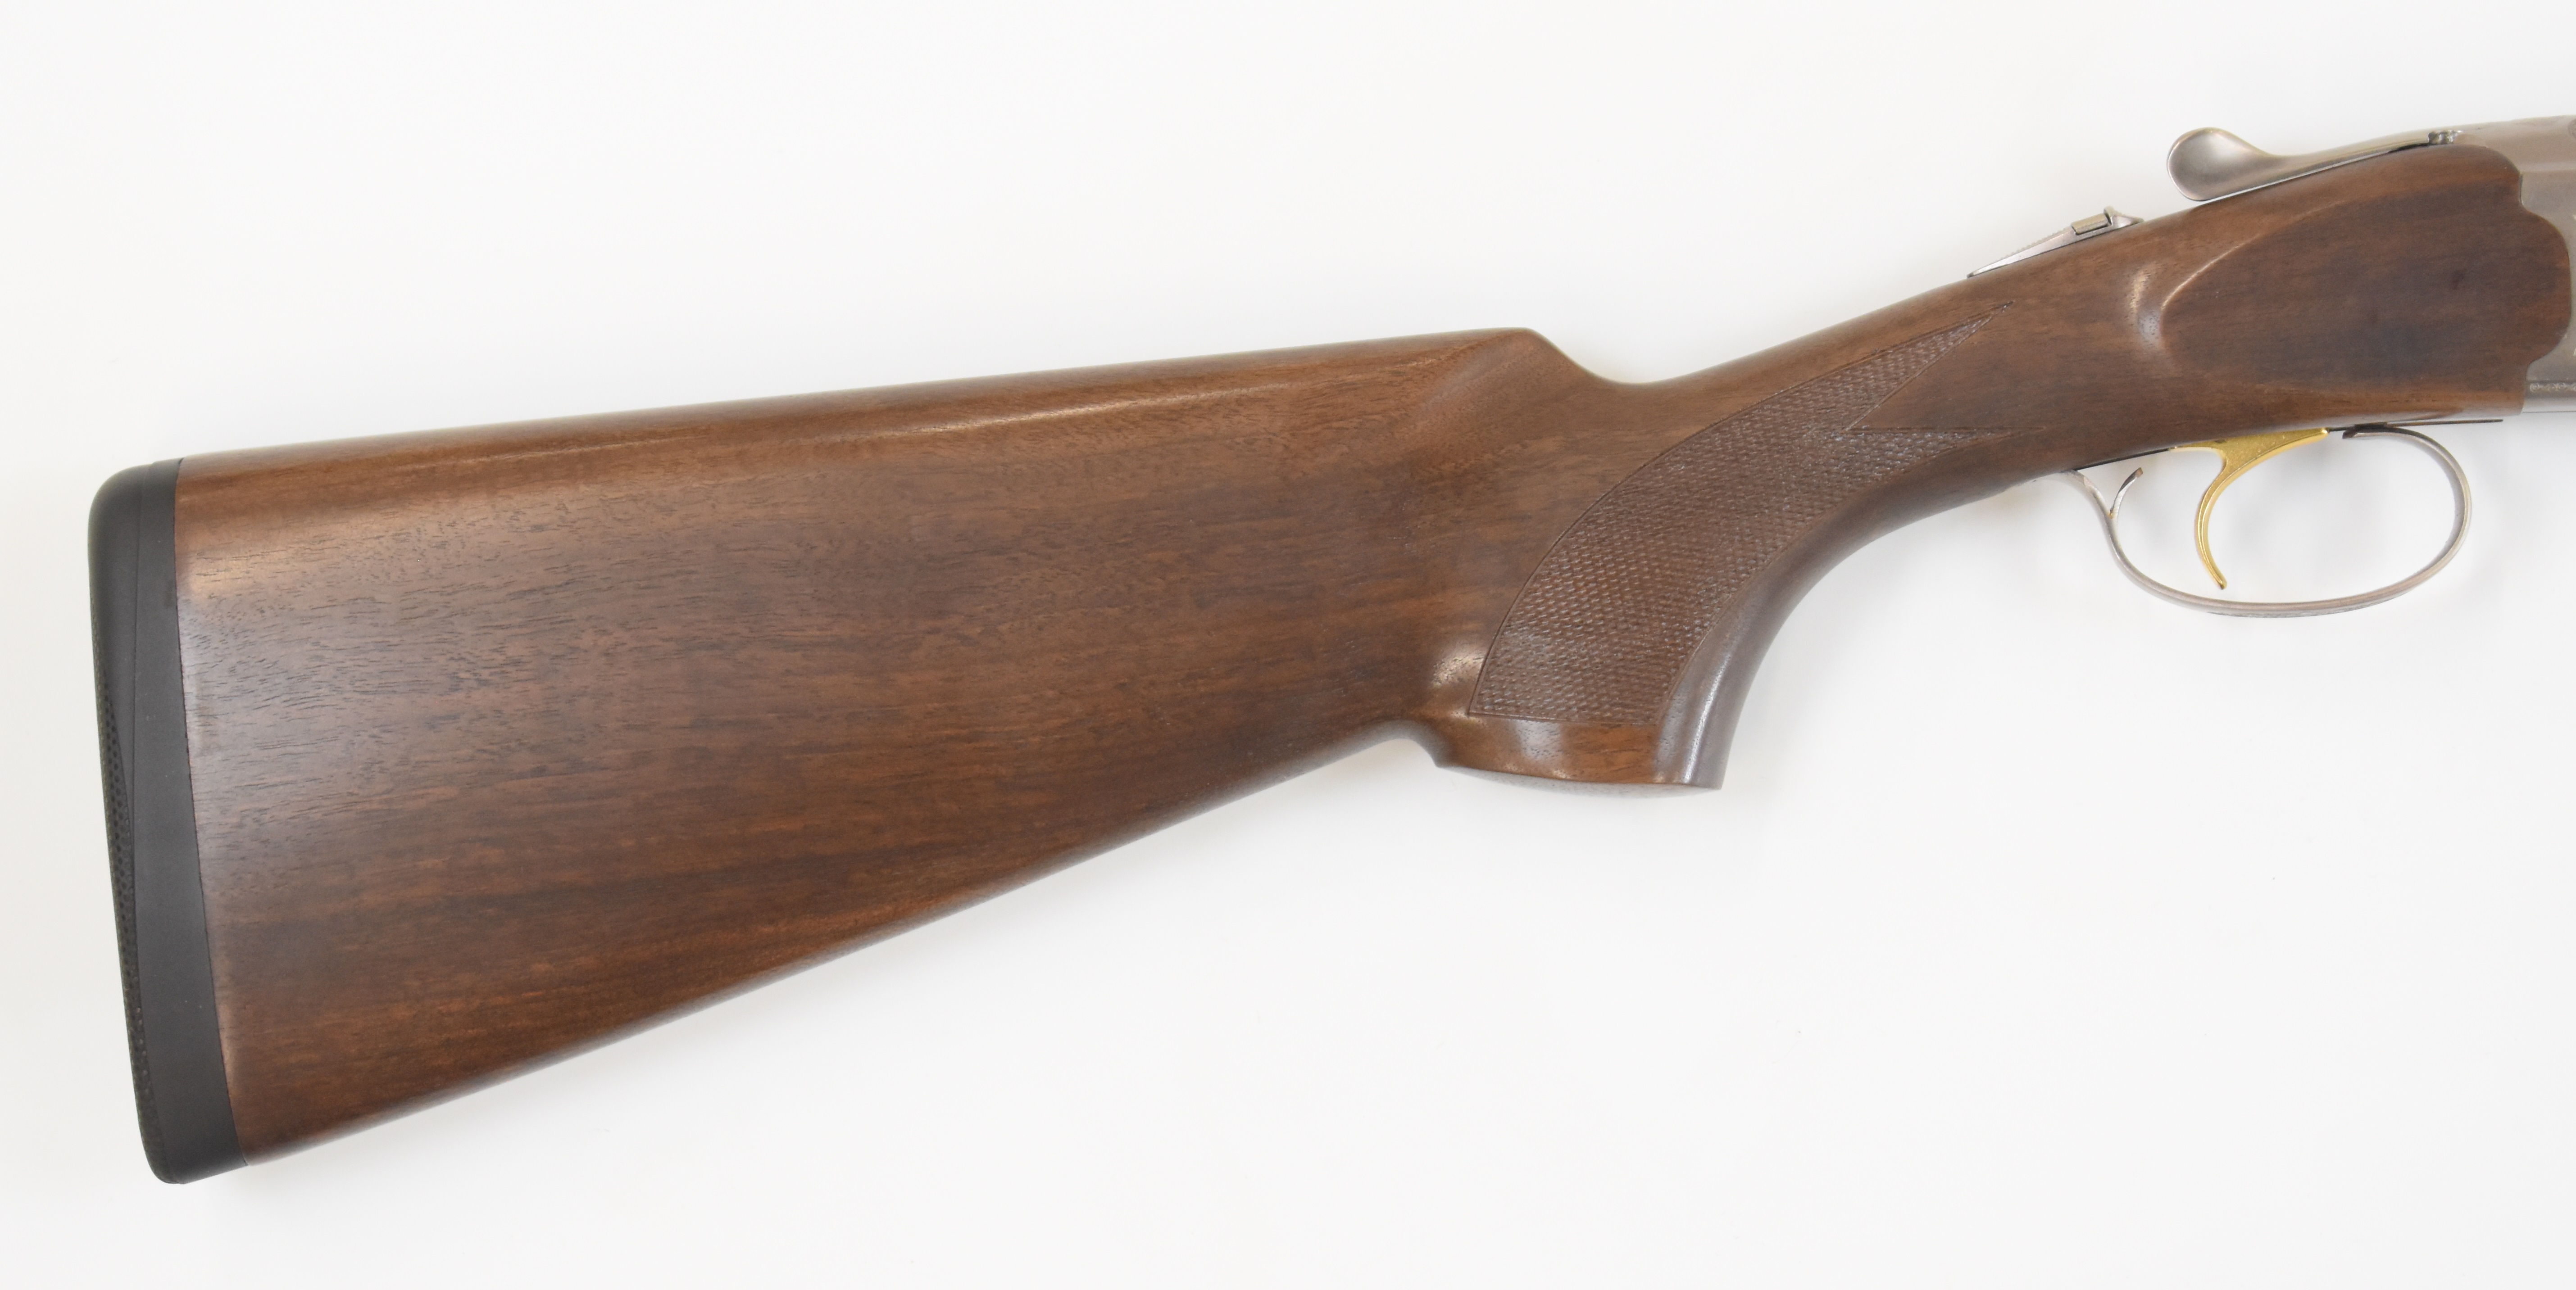 Beretta 686 Silver Pigeon I 28 bore over and under ejector shotgun with named and engraved lock - Image 17 of 28